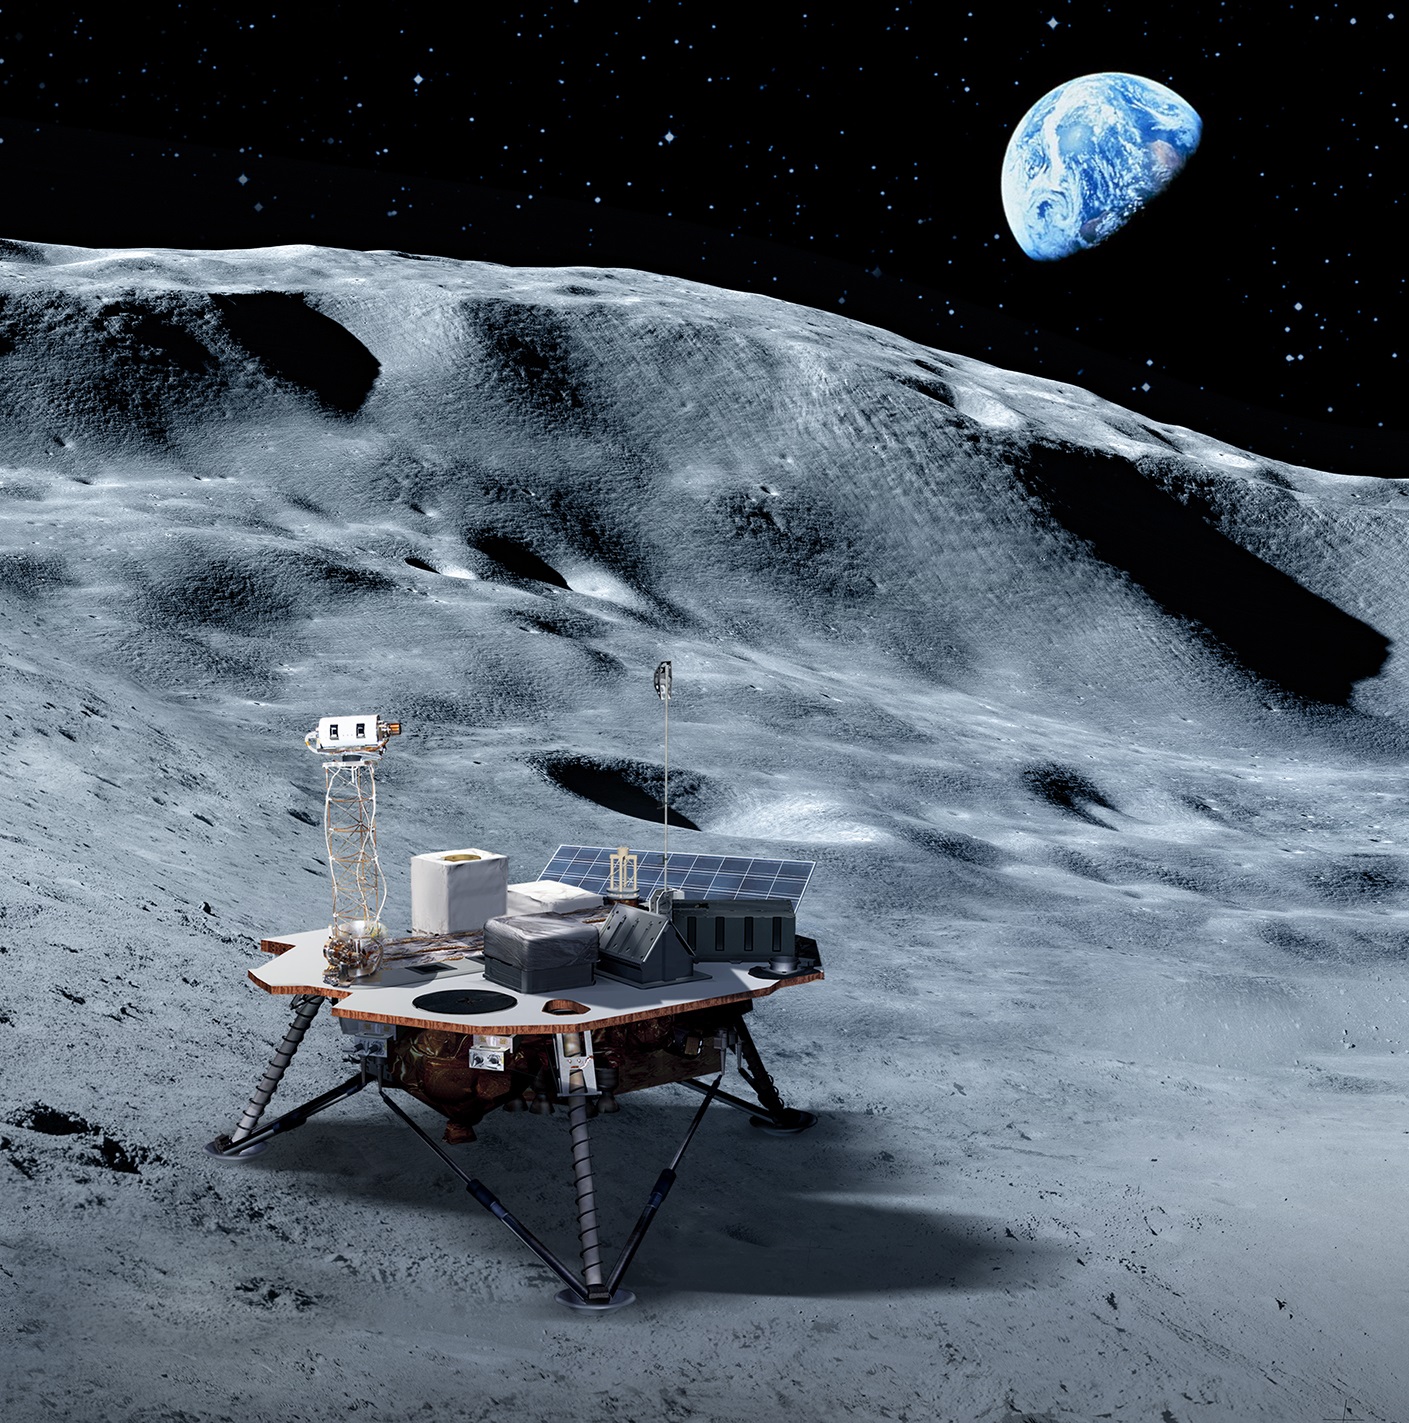 Commercial landers will carry NASA-provided science and technology payloads to the lunar surface